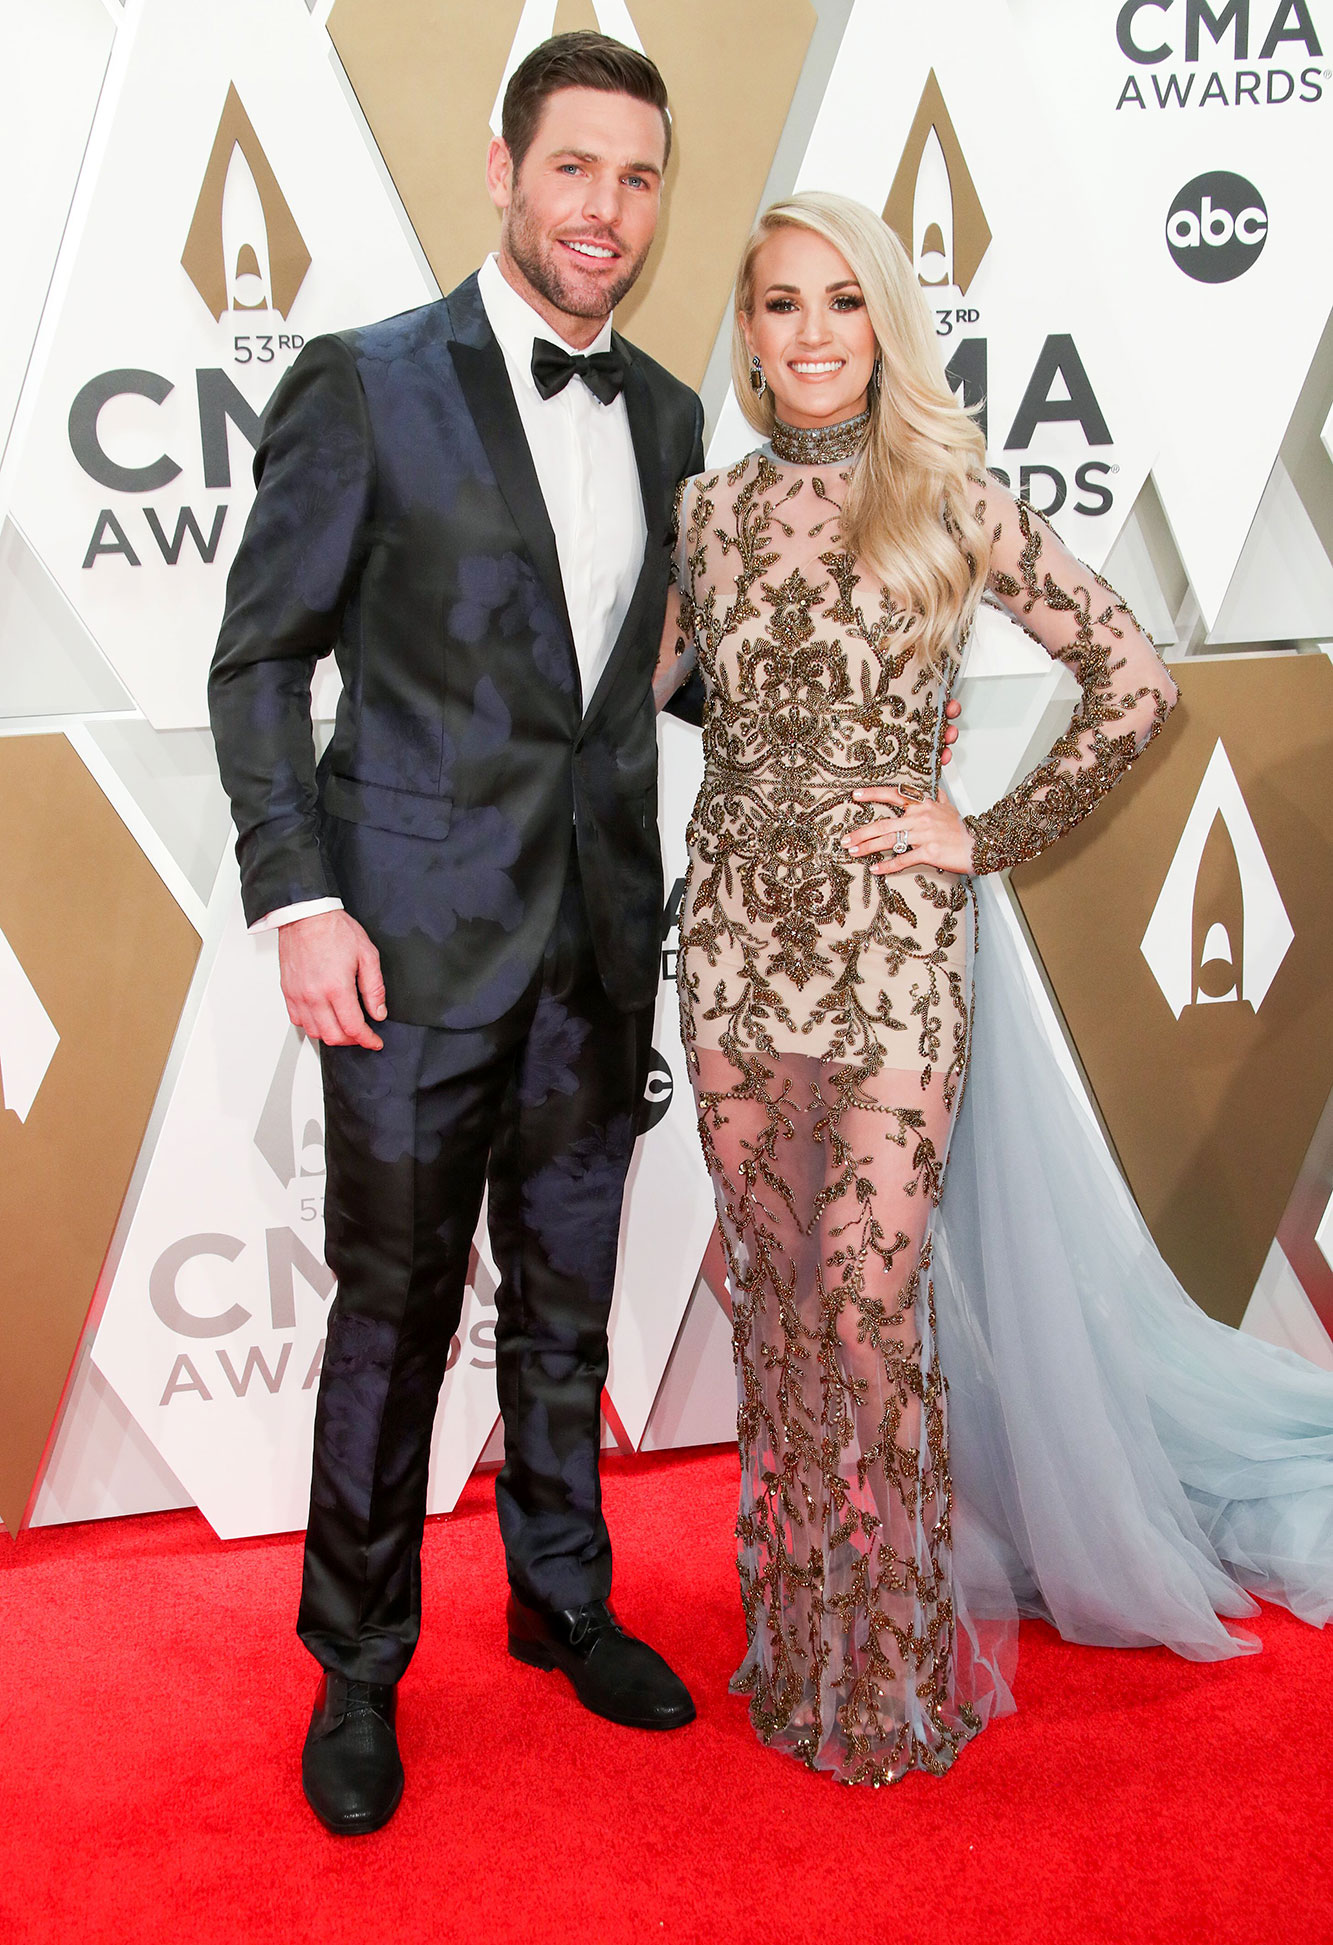 Mike Fisher and Carrie Underwood PDA Arrival Red Carpet 2019 CMA Awards